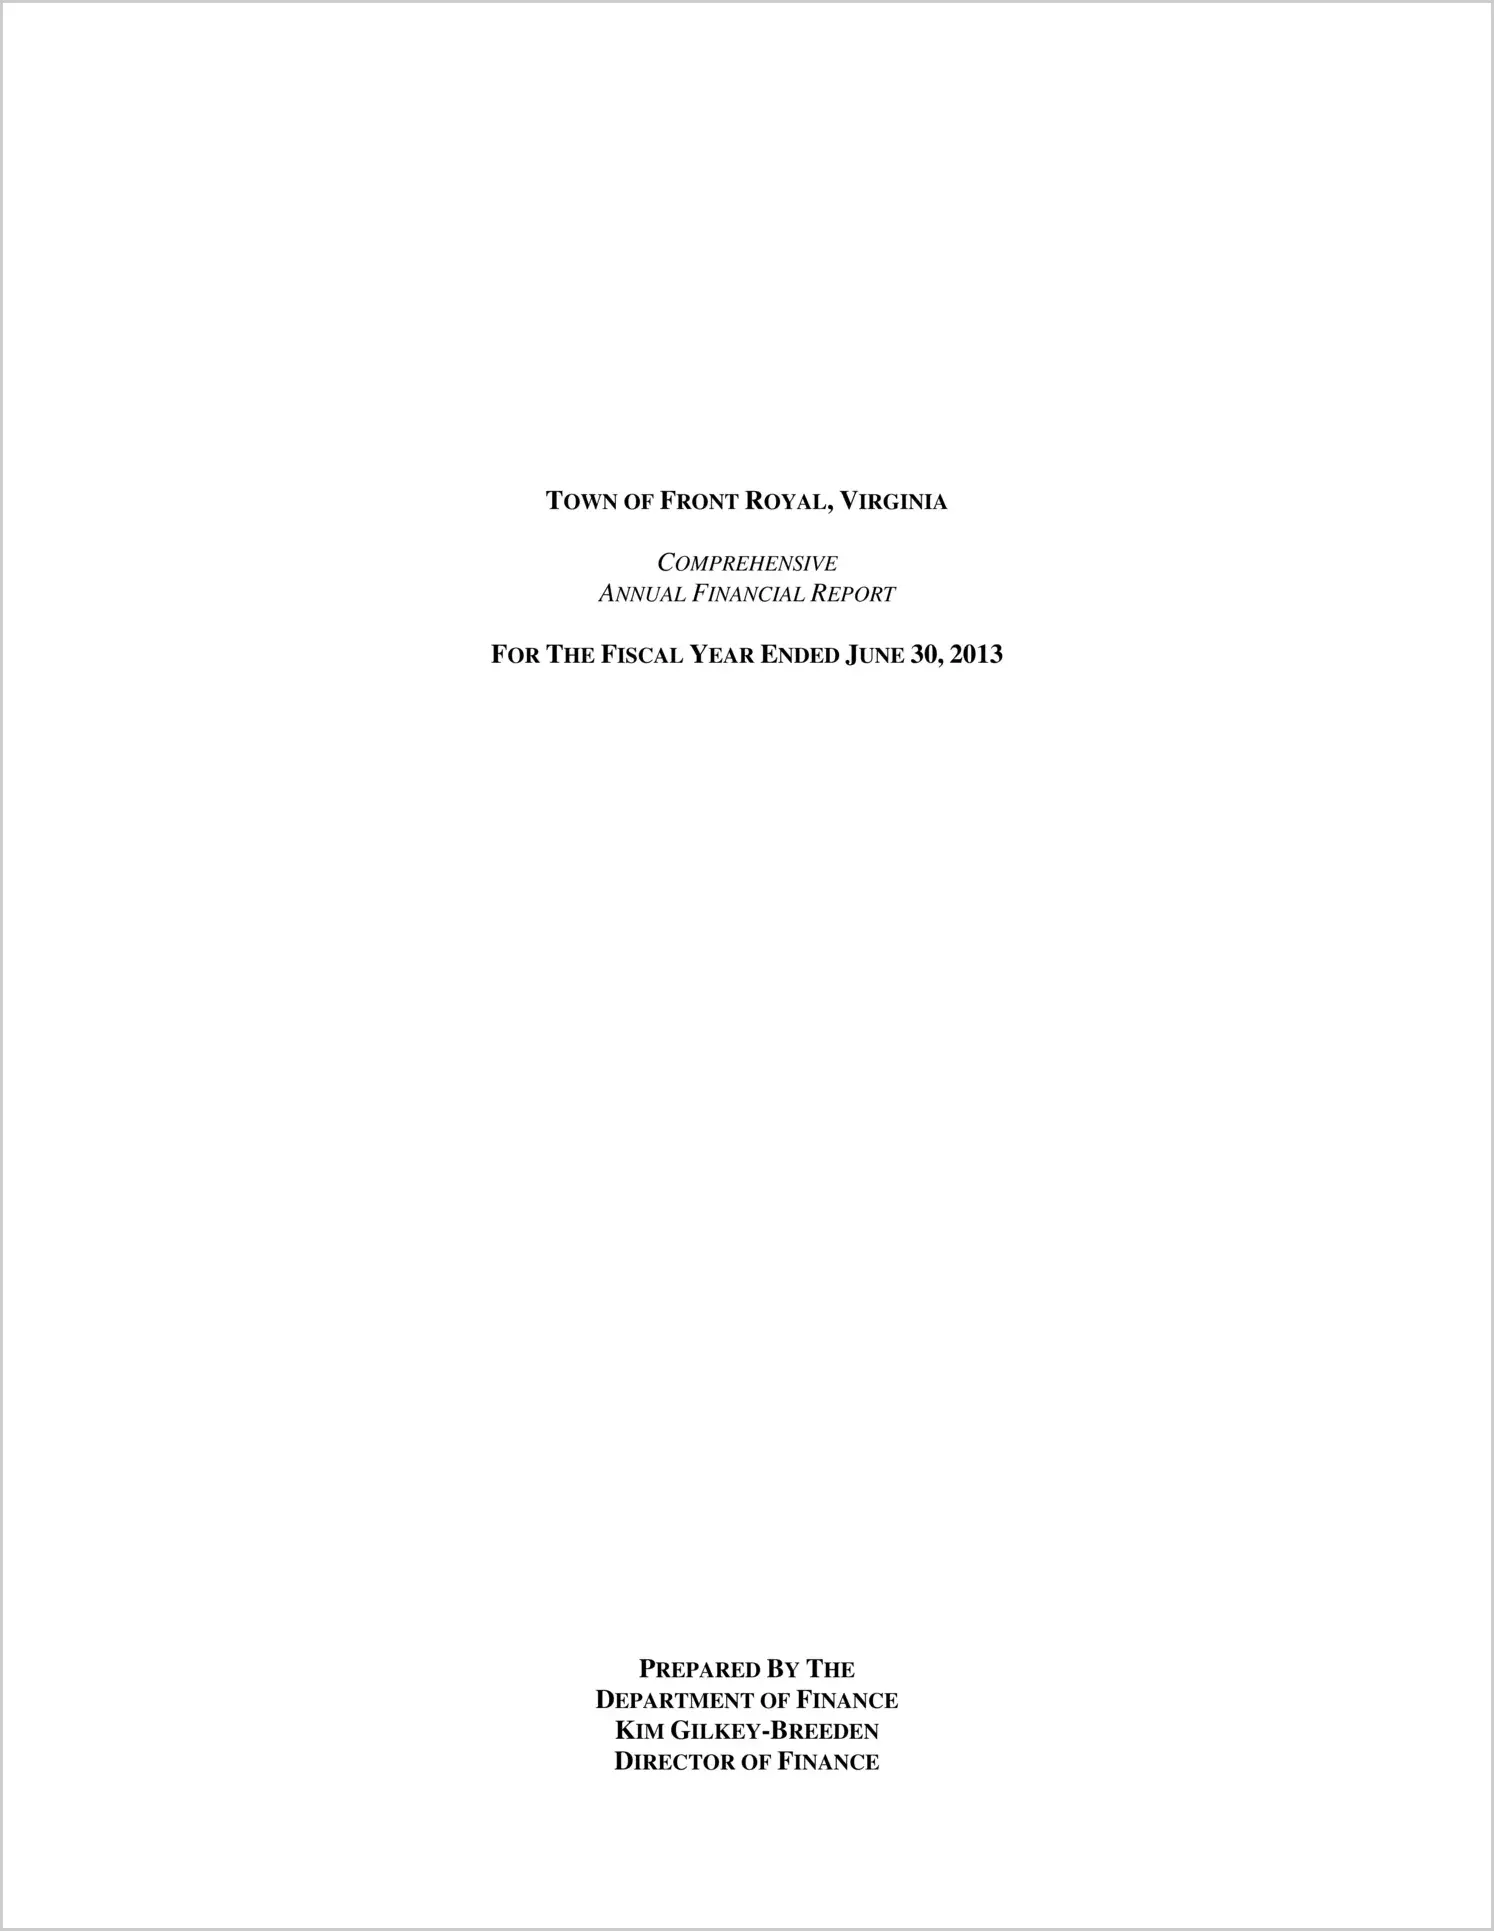 2013 Annual Financial Report for Town of Front Royal